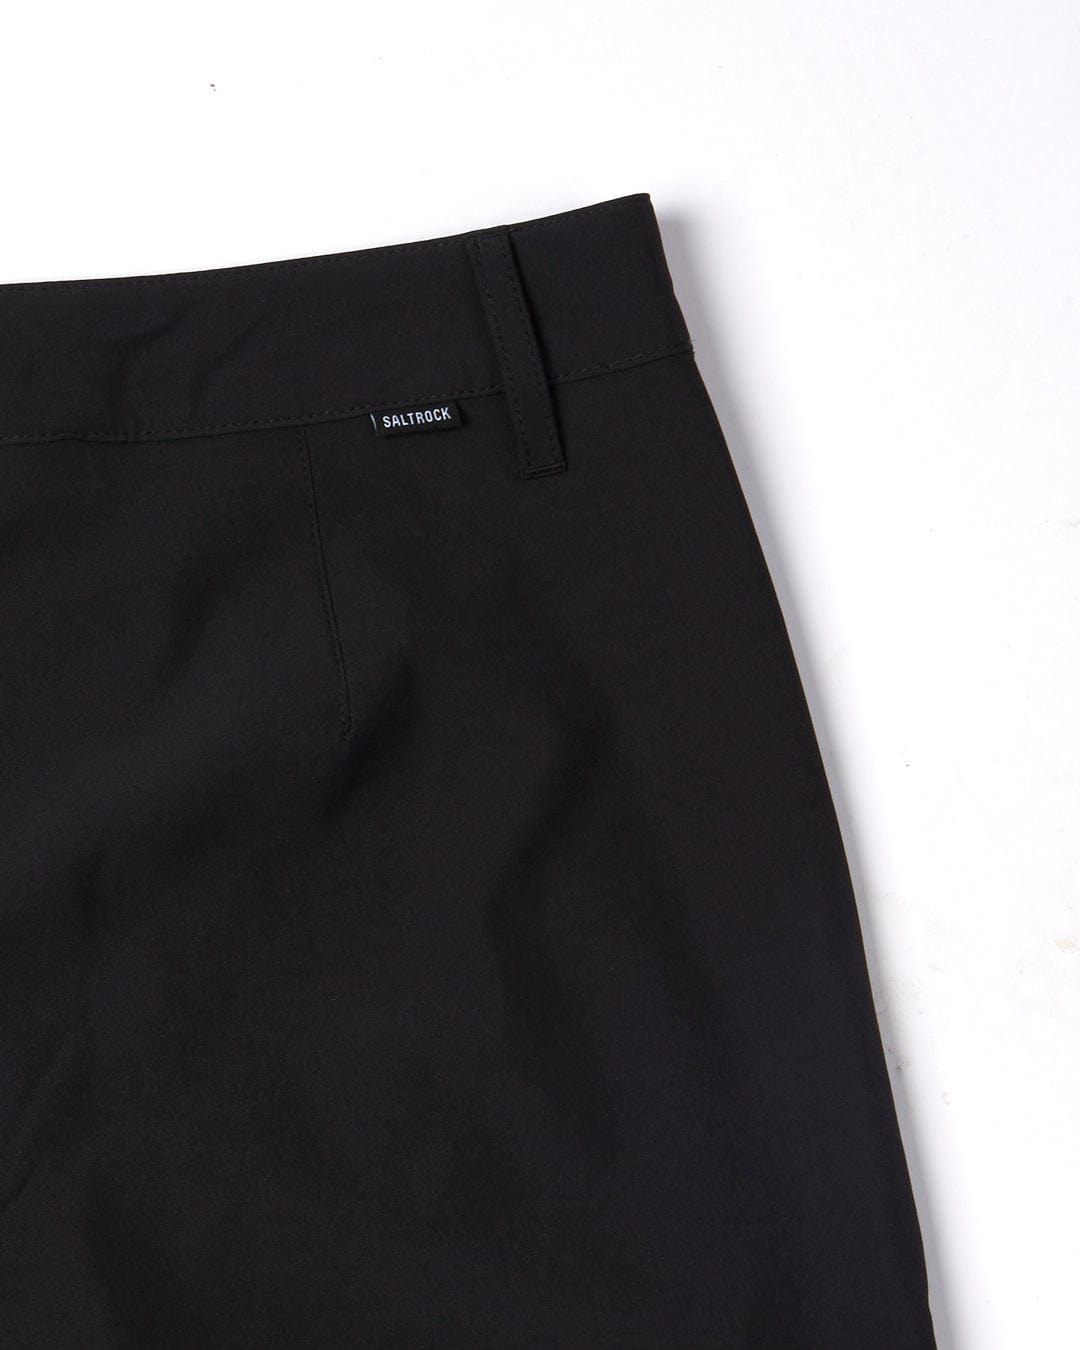 Close-up of a Saltrock black Amphibian boardshort on a white background, focusing on the waistband and zip fastening.